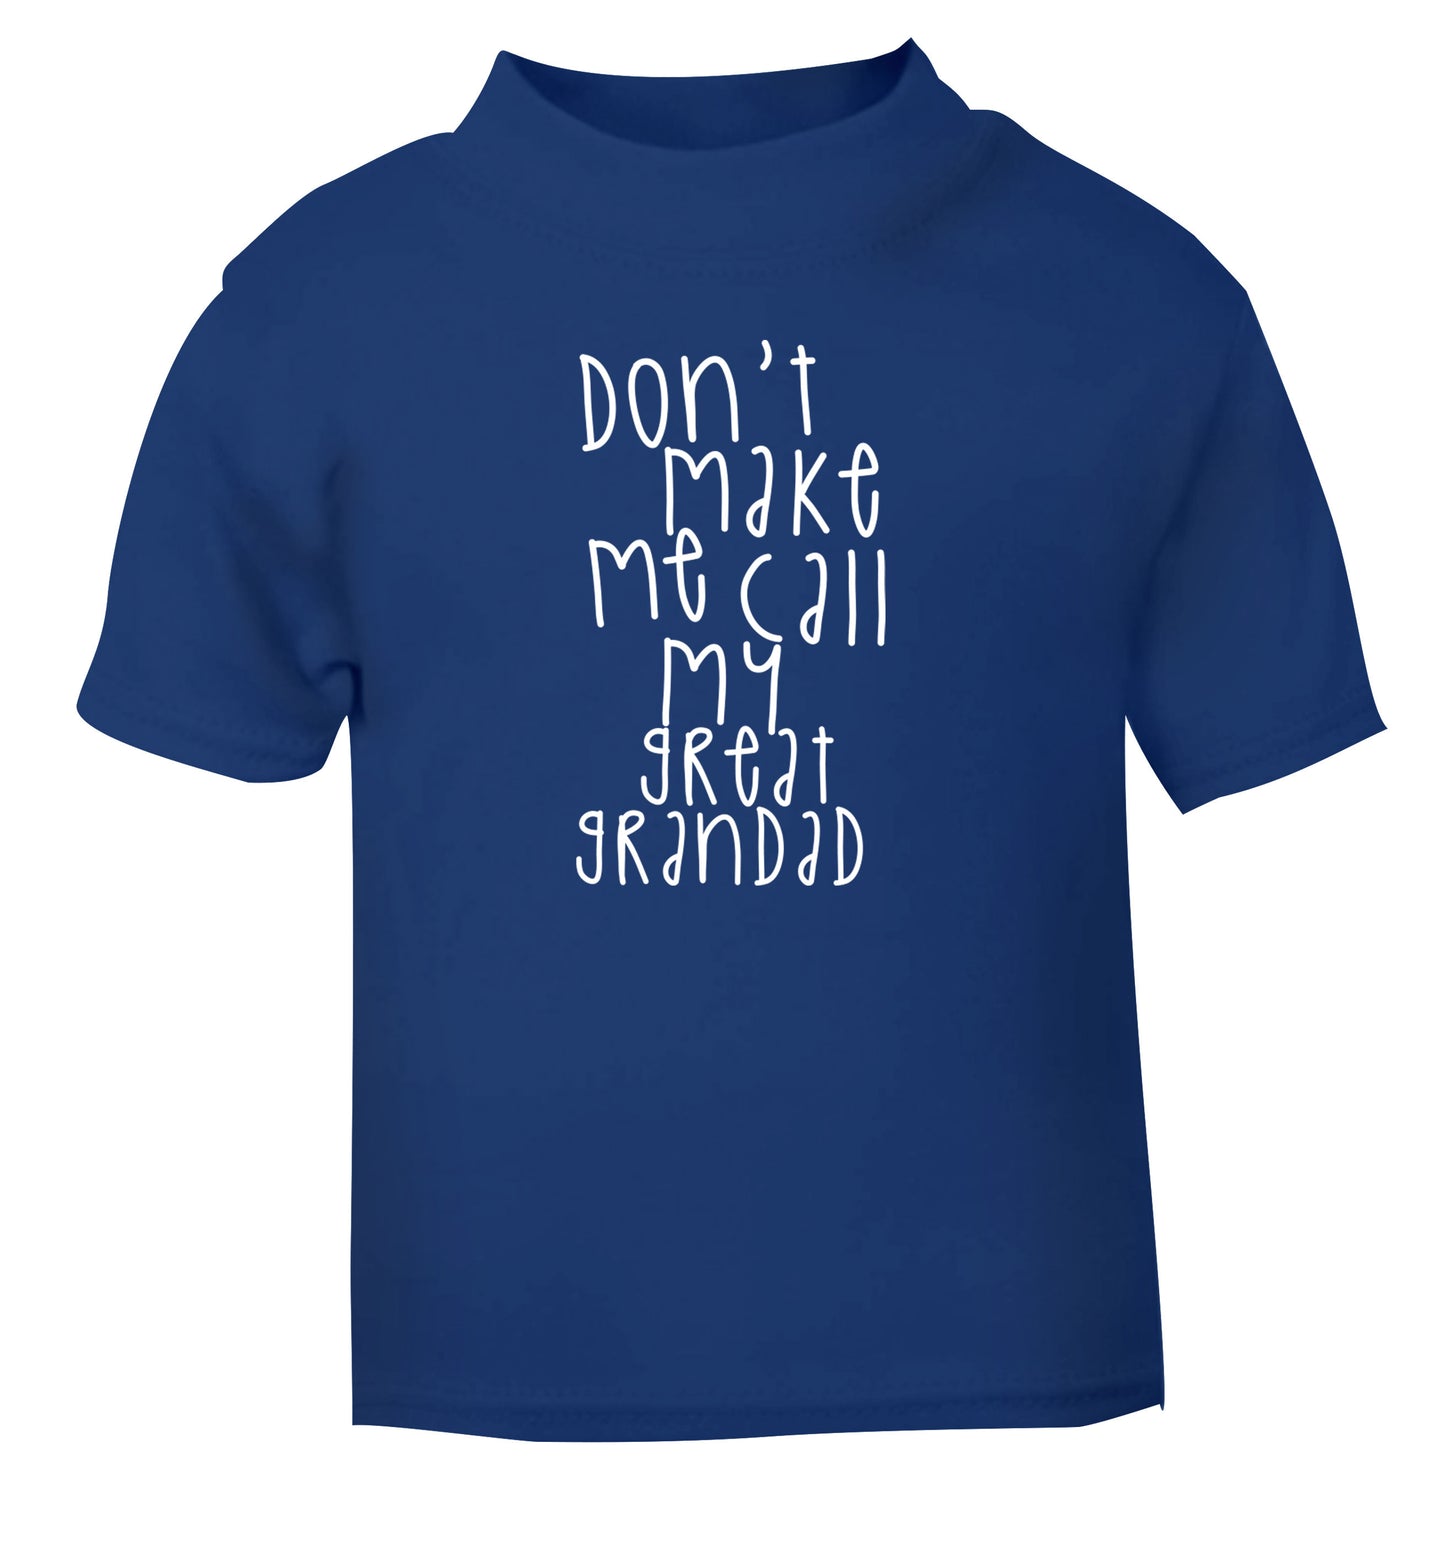 Don't make me call my great grandad blue Baby Toddler Tshirt 2 Years